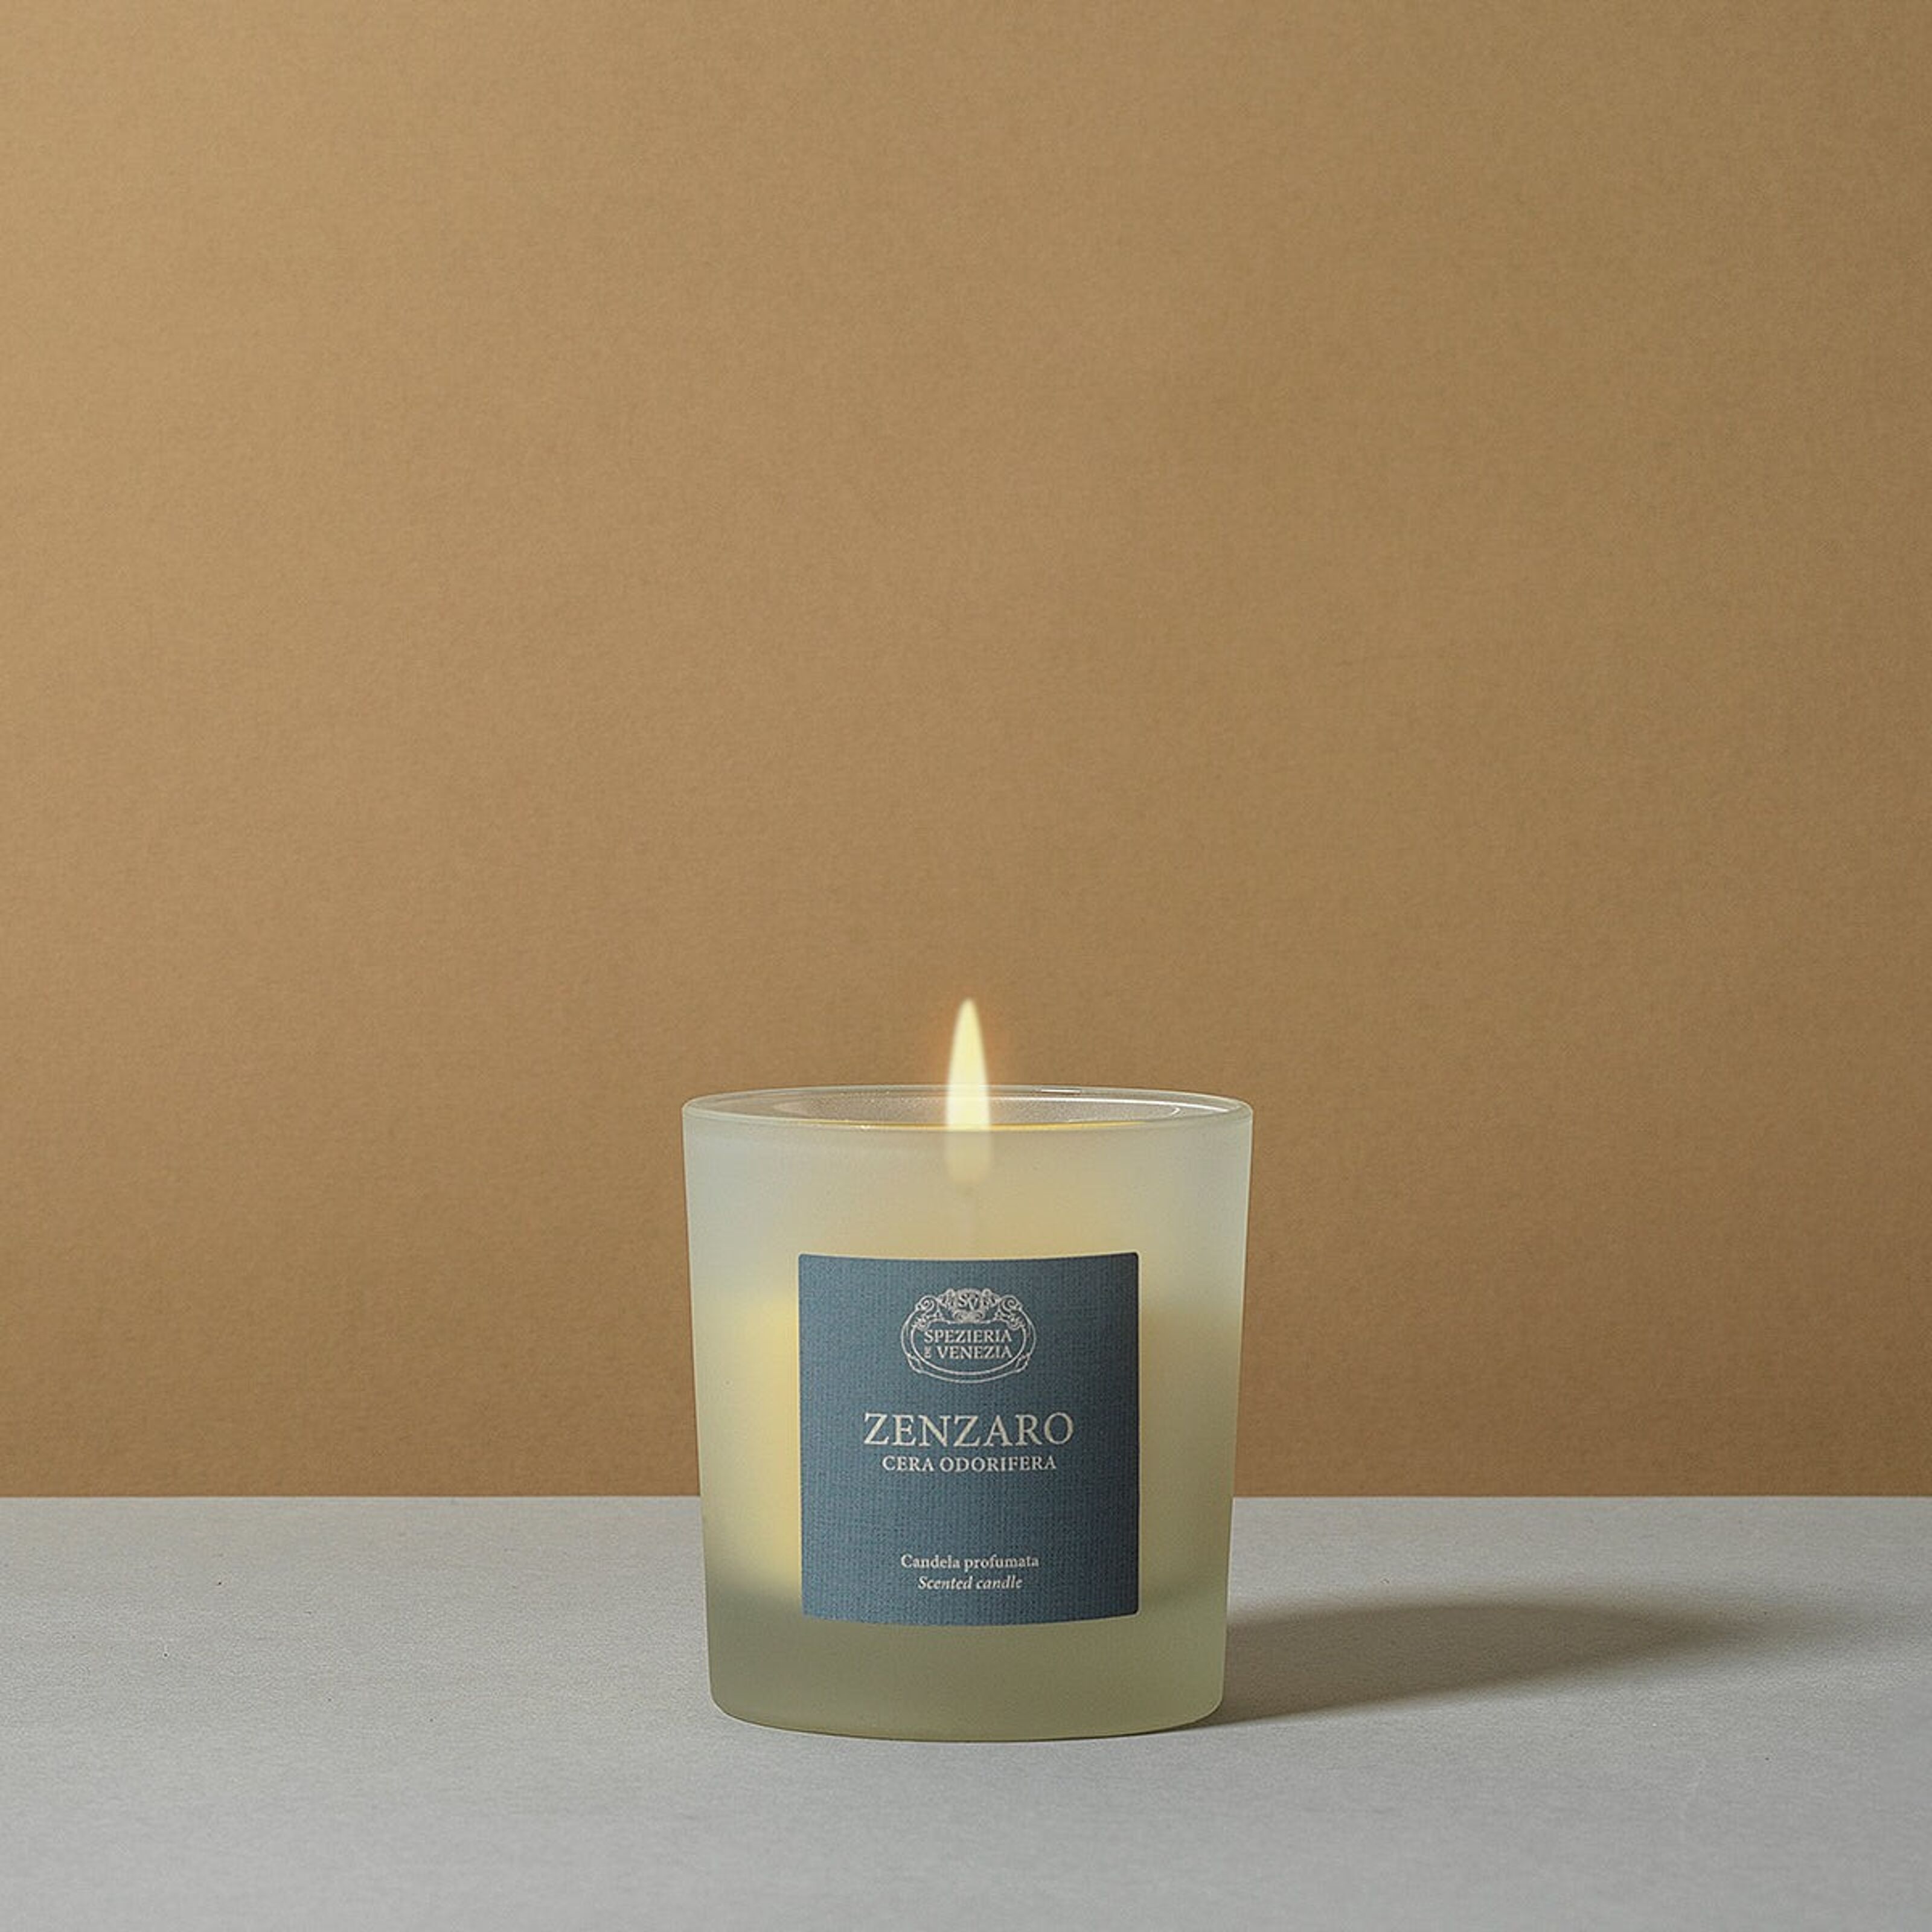 Rituals Private Collection Orris Mimosa Scented Candle - Duftkerze Orris  Mimosa